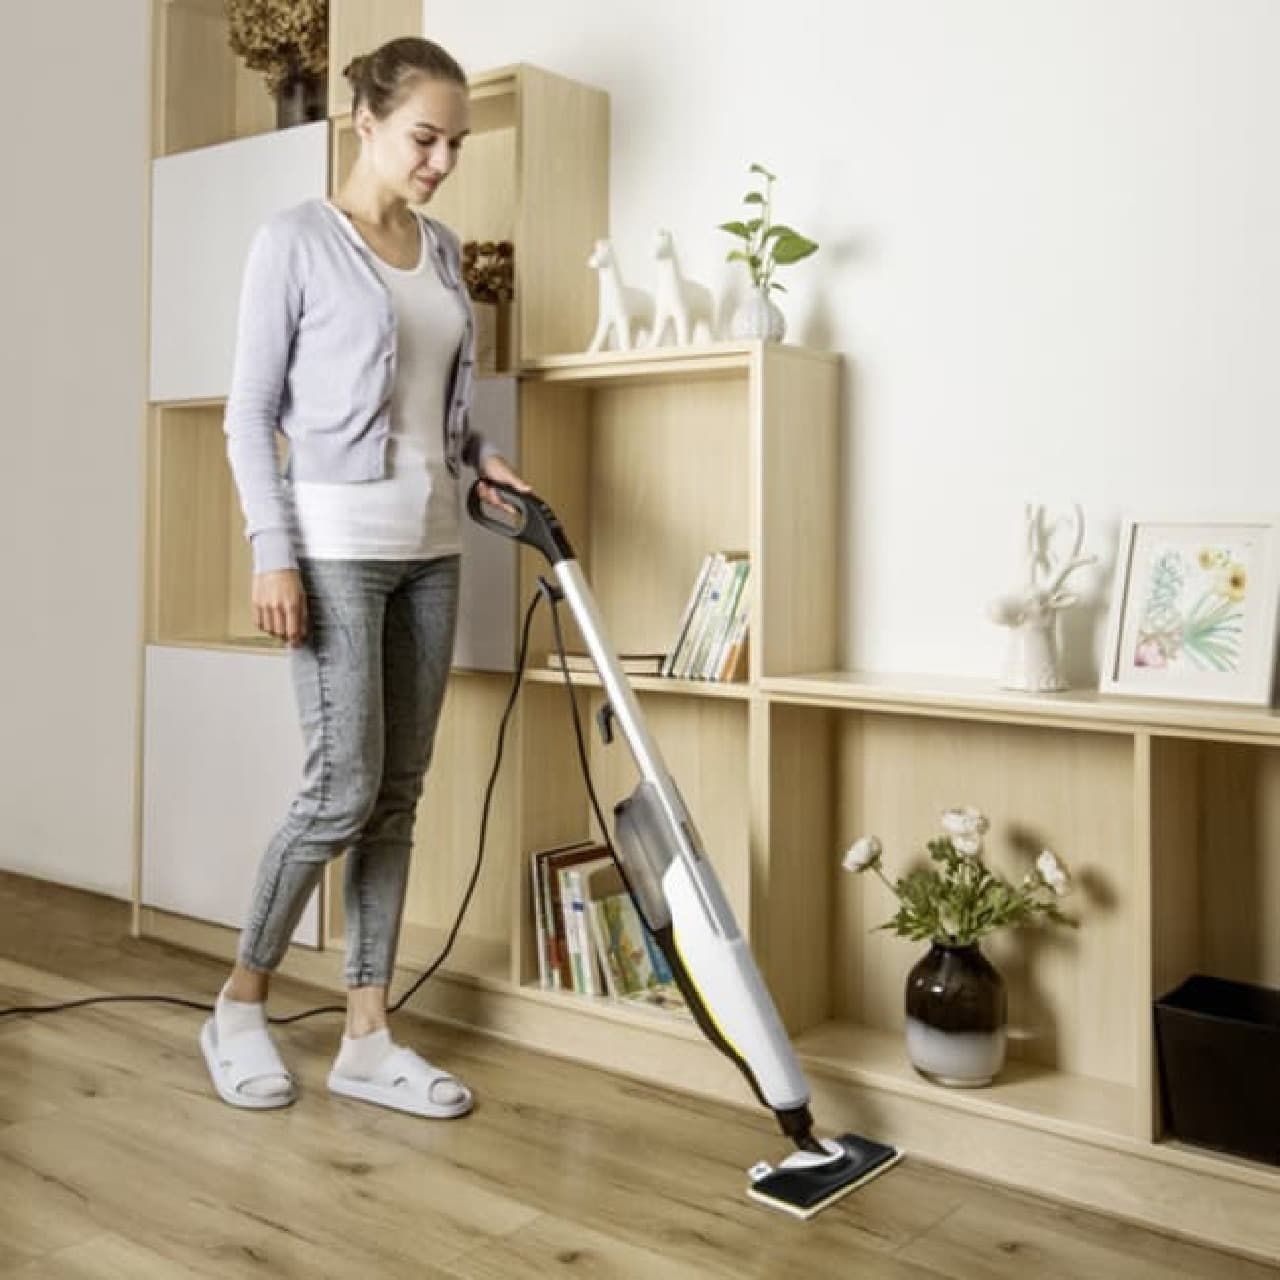 Household steam mop "SC Upright / SC Upright Premium" From Karcher --High temperature steam makes dirt clean and gaps easy